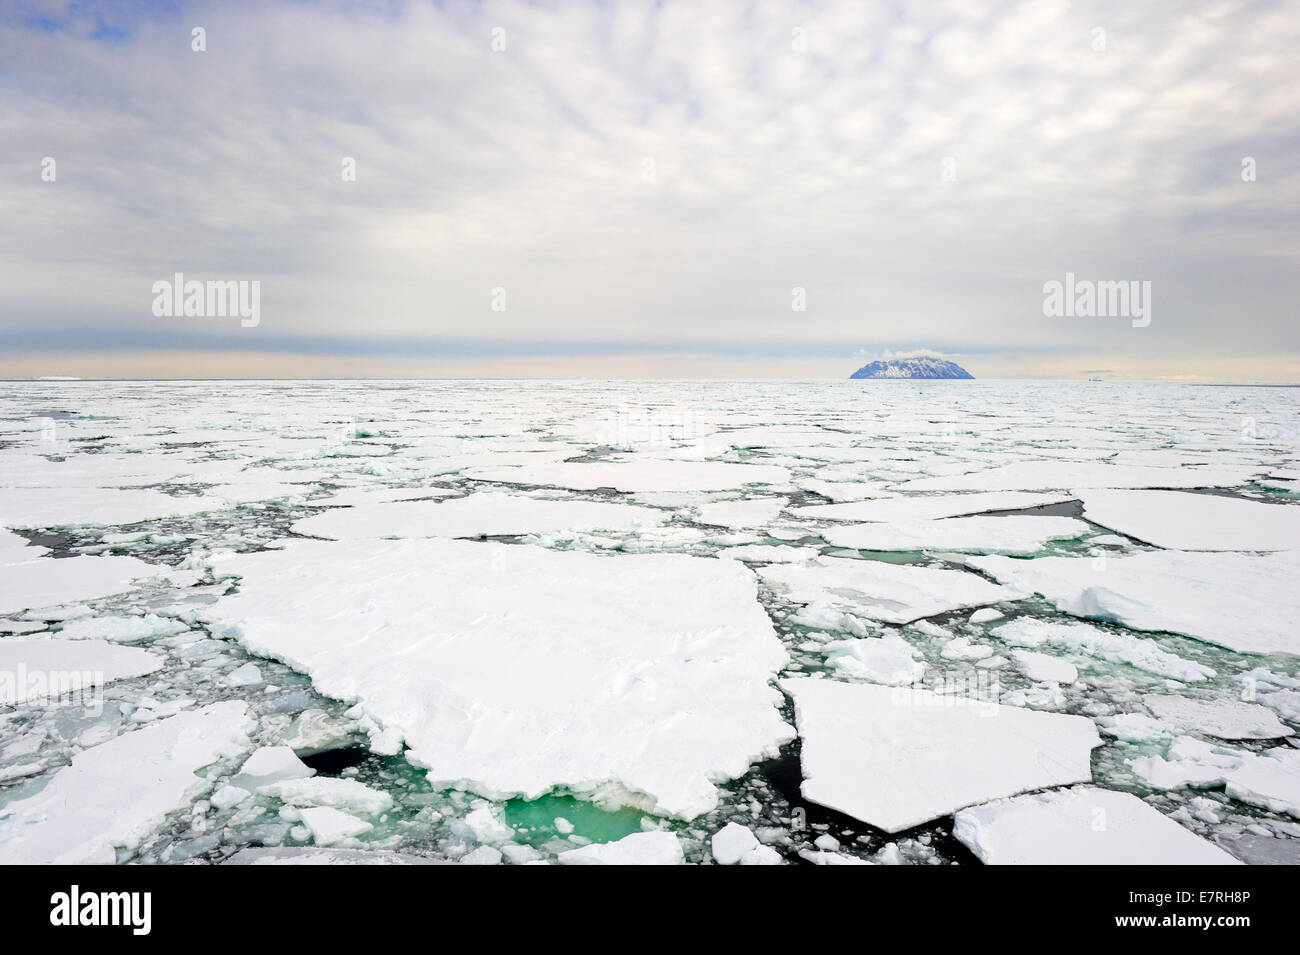 Small island in the Ross sea, Antarctica, with pack ice in the foreground. Stock Photo